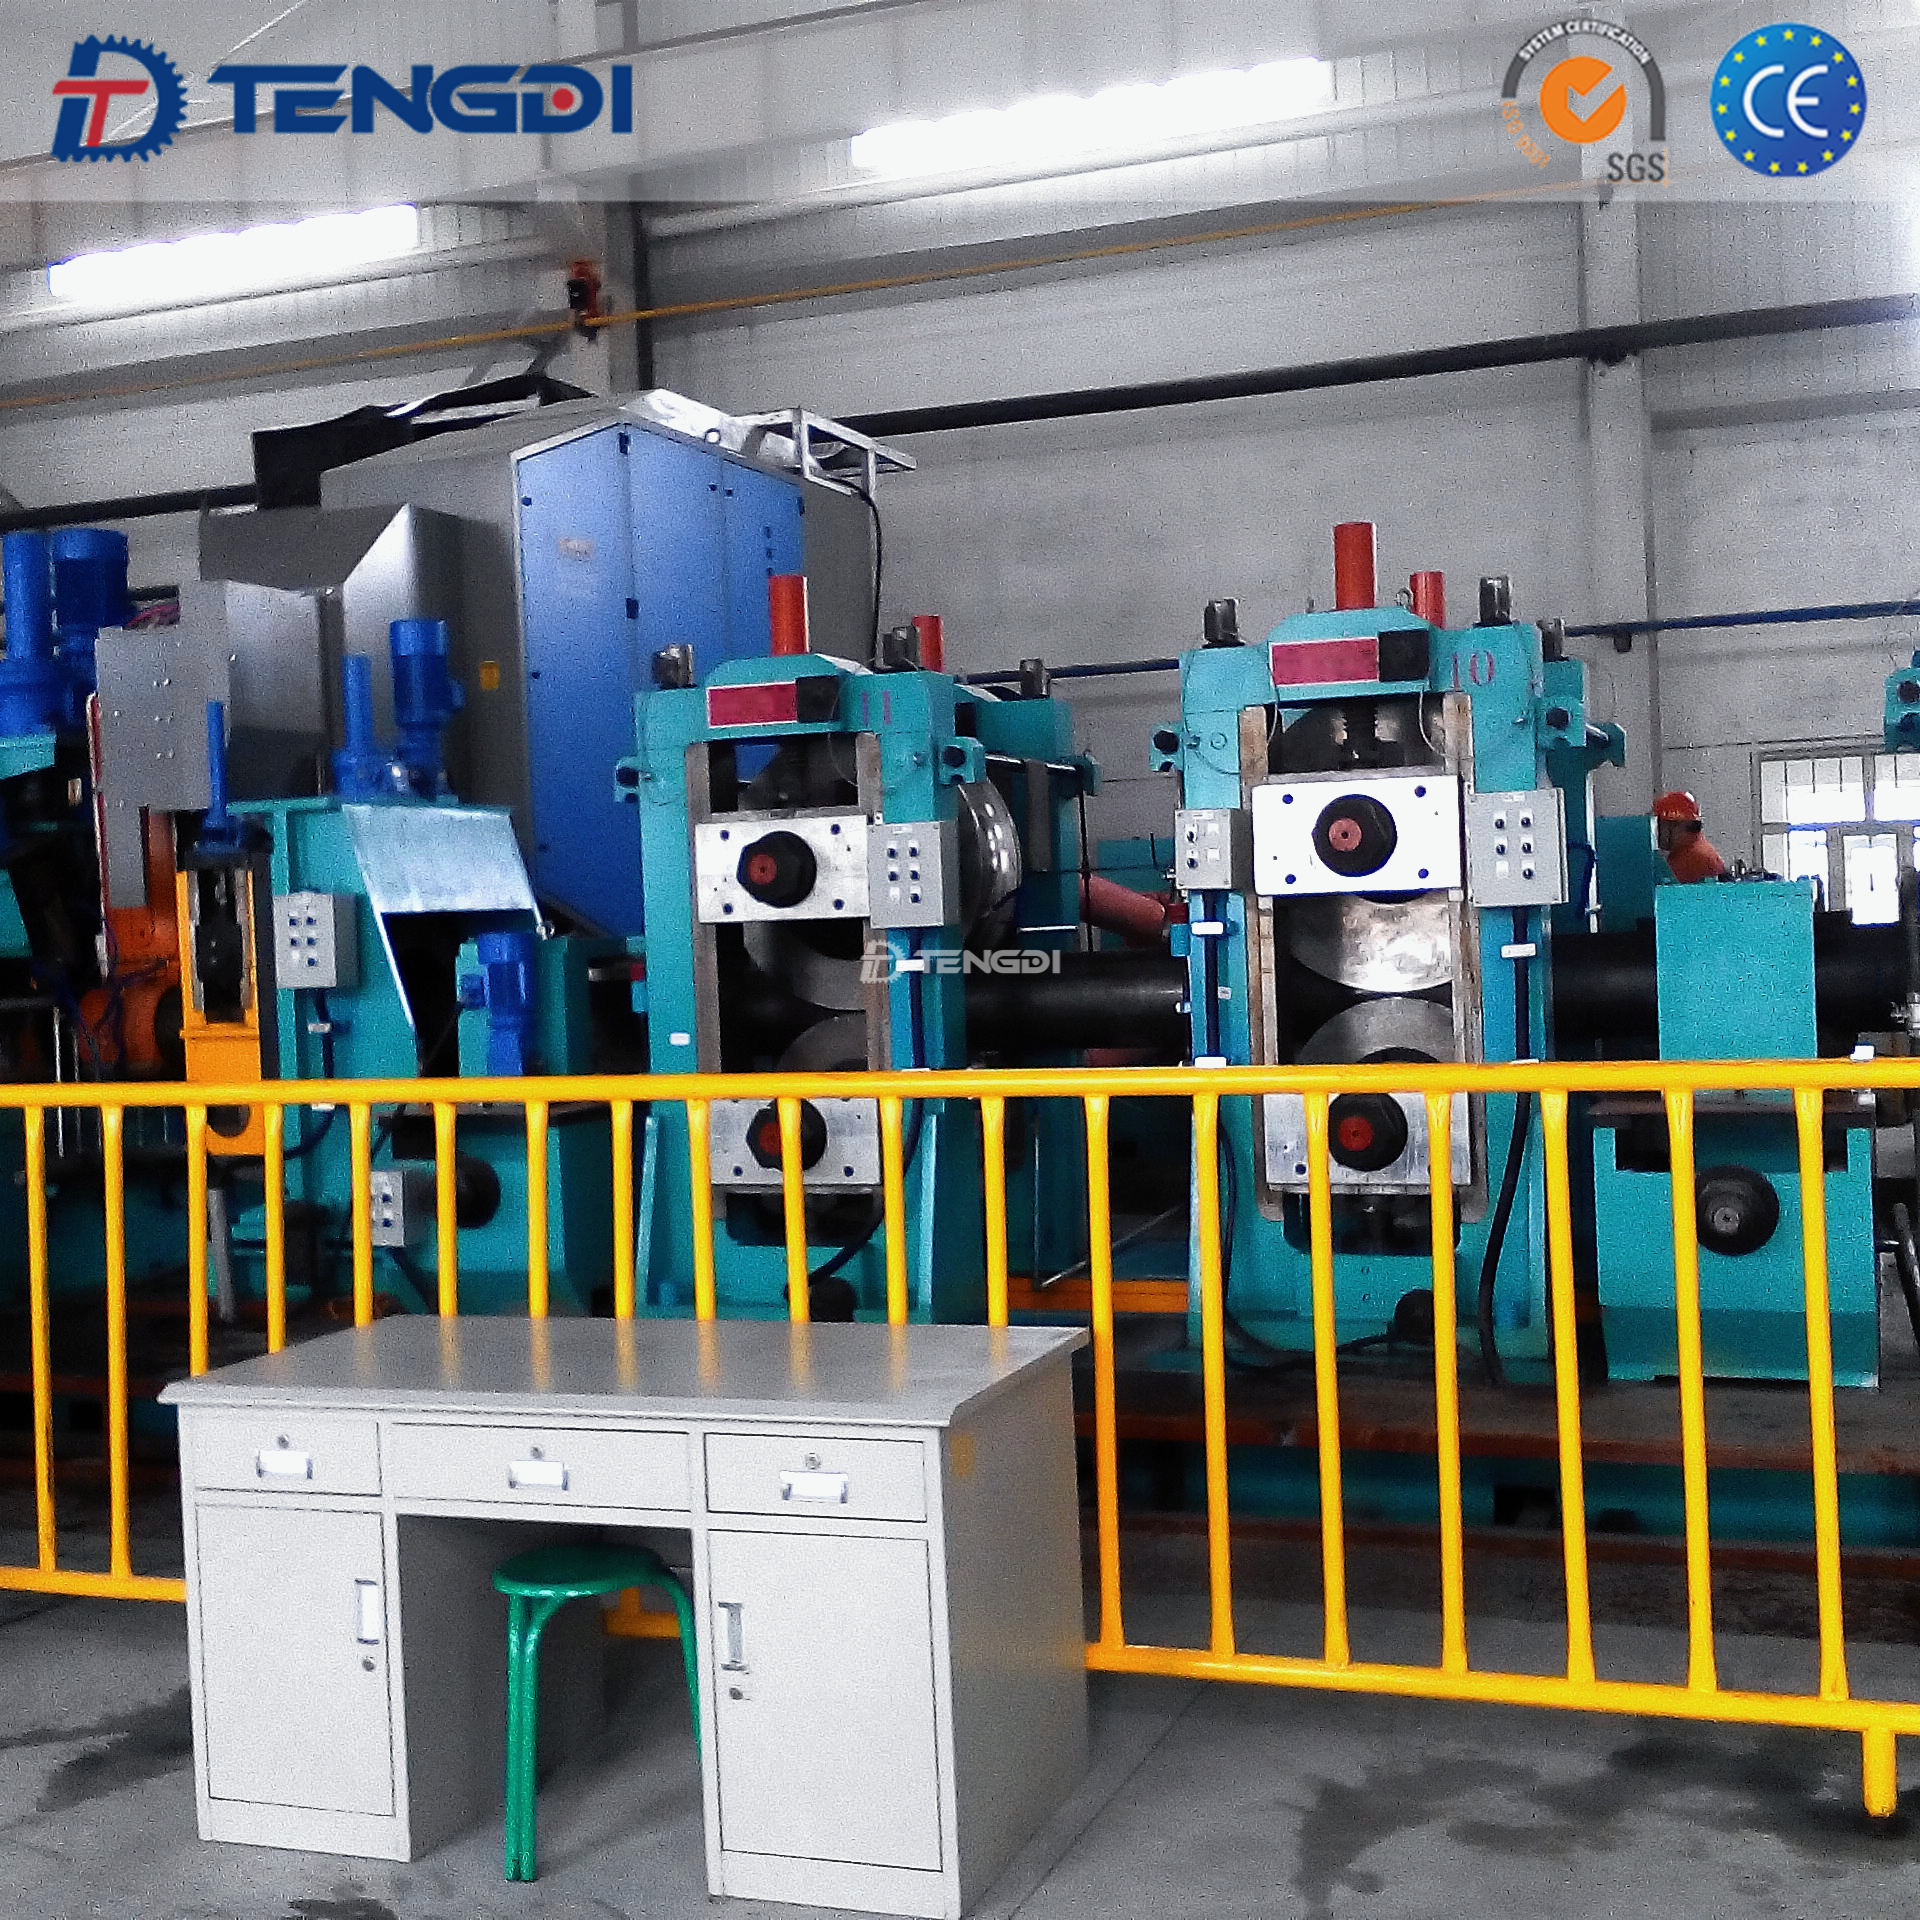 HG325 High Frequency Welding ERW Steel Tube Mill /ERW Tube mill